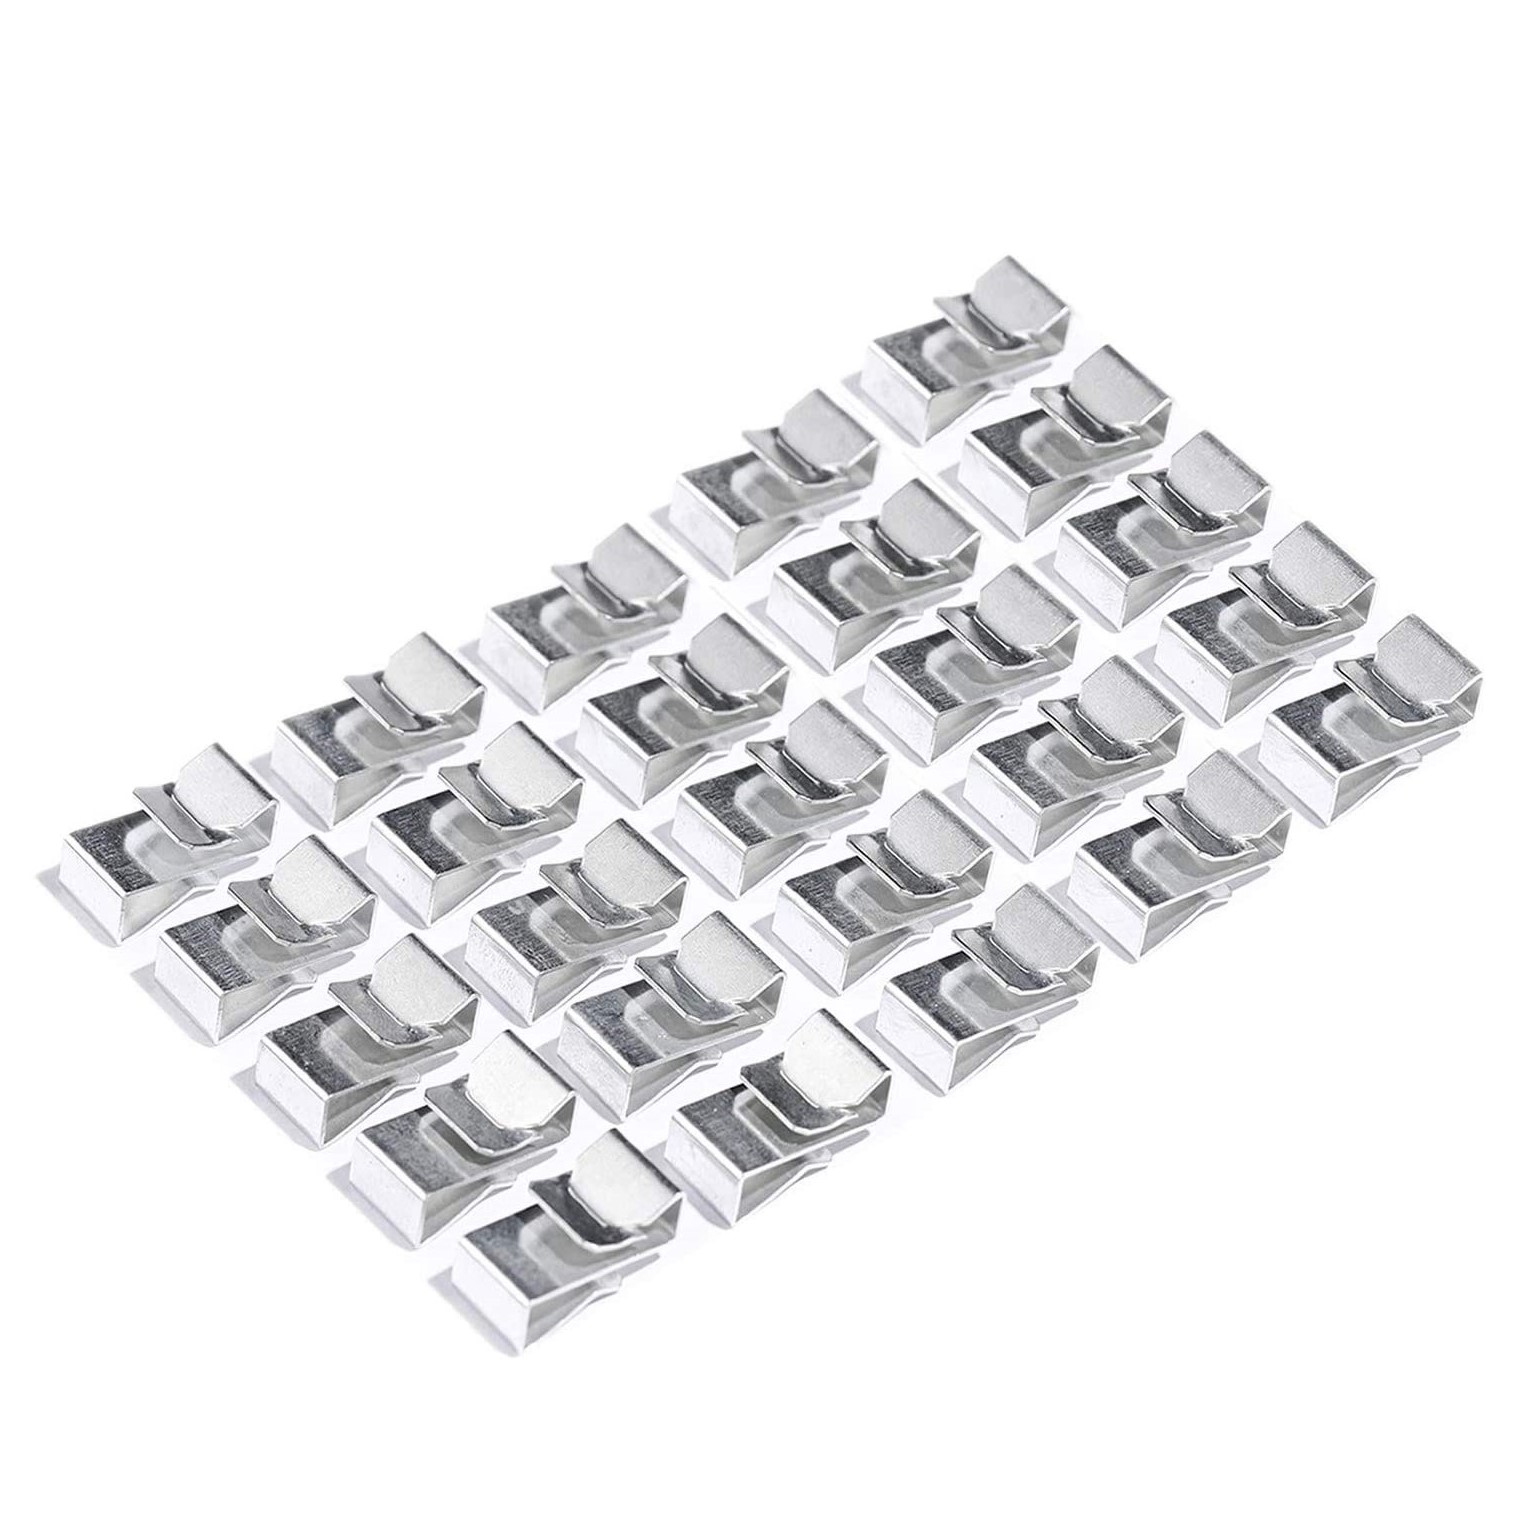 China 101511 25PCS Trailer Frame Wire Clips – Frame Mount Trailer Light Wiring  Clips factory and manufacturers